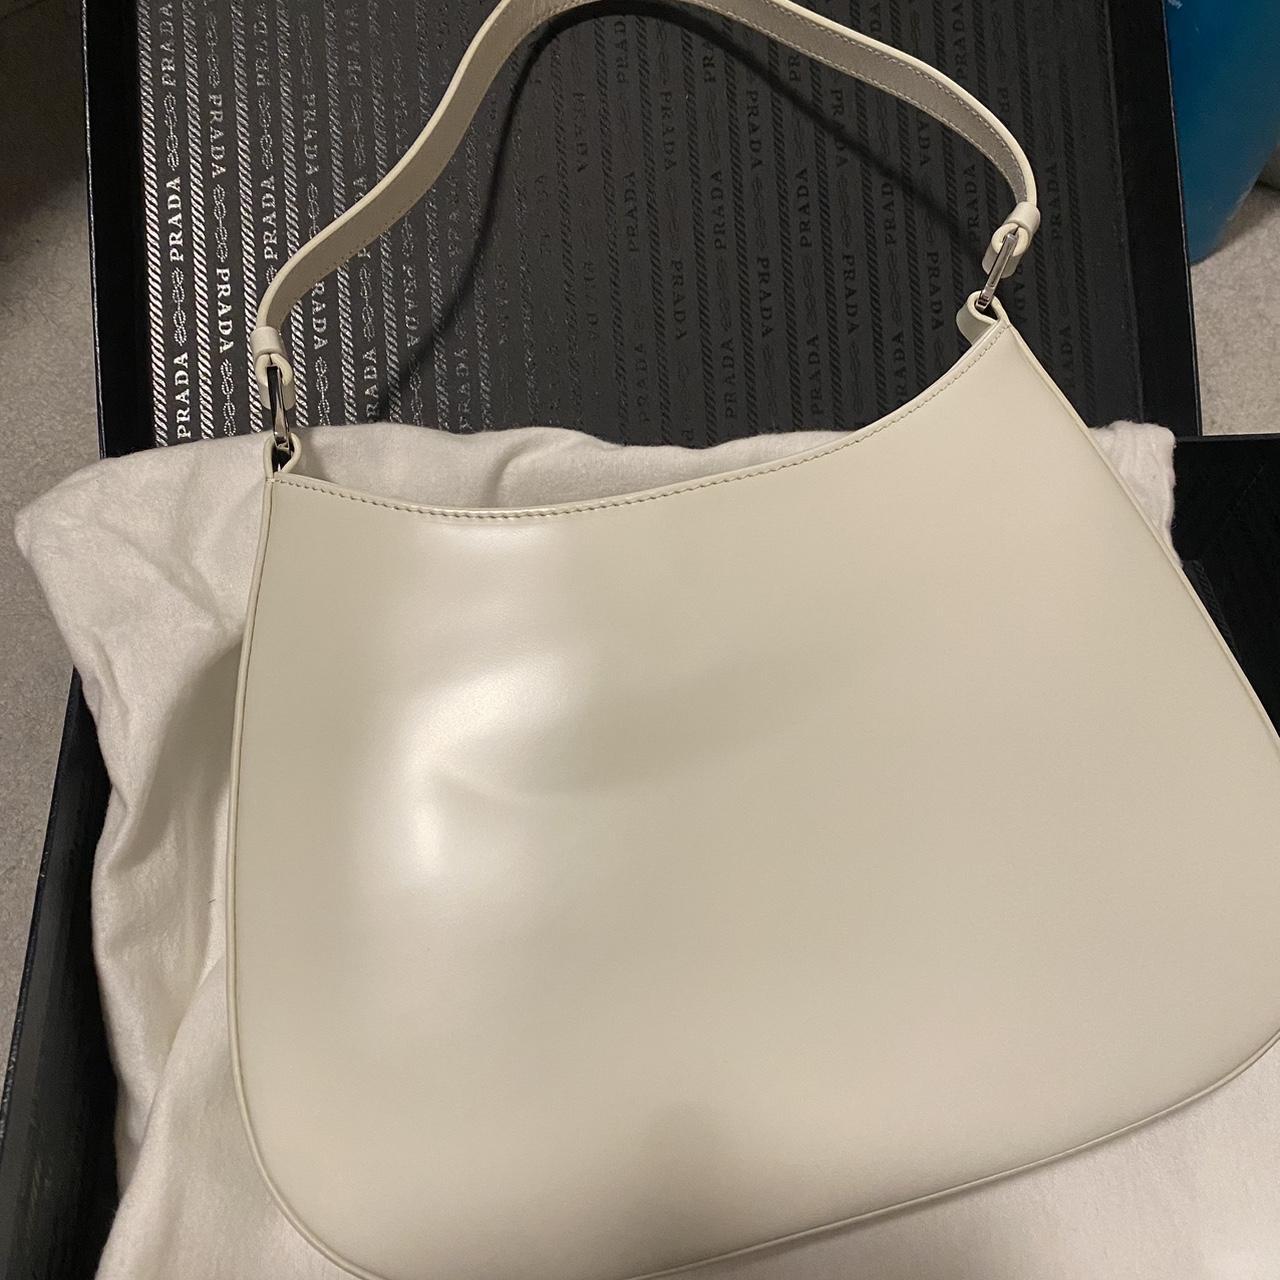 Prada Cleo bag in white with Brushed leather box,... - Depop